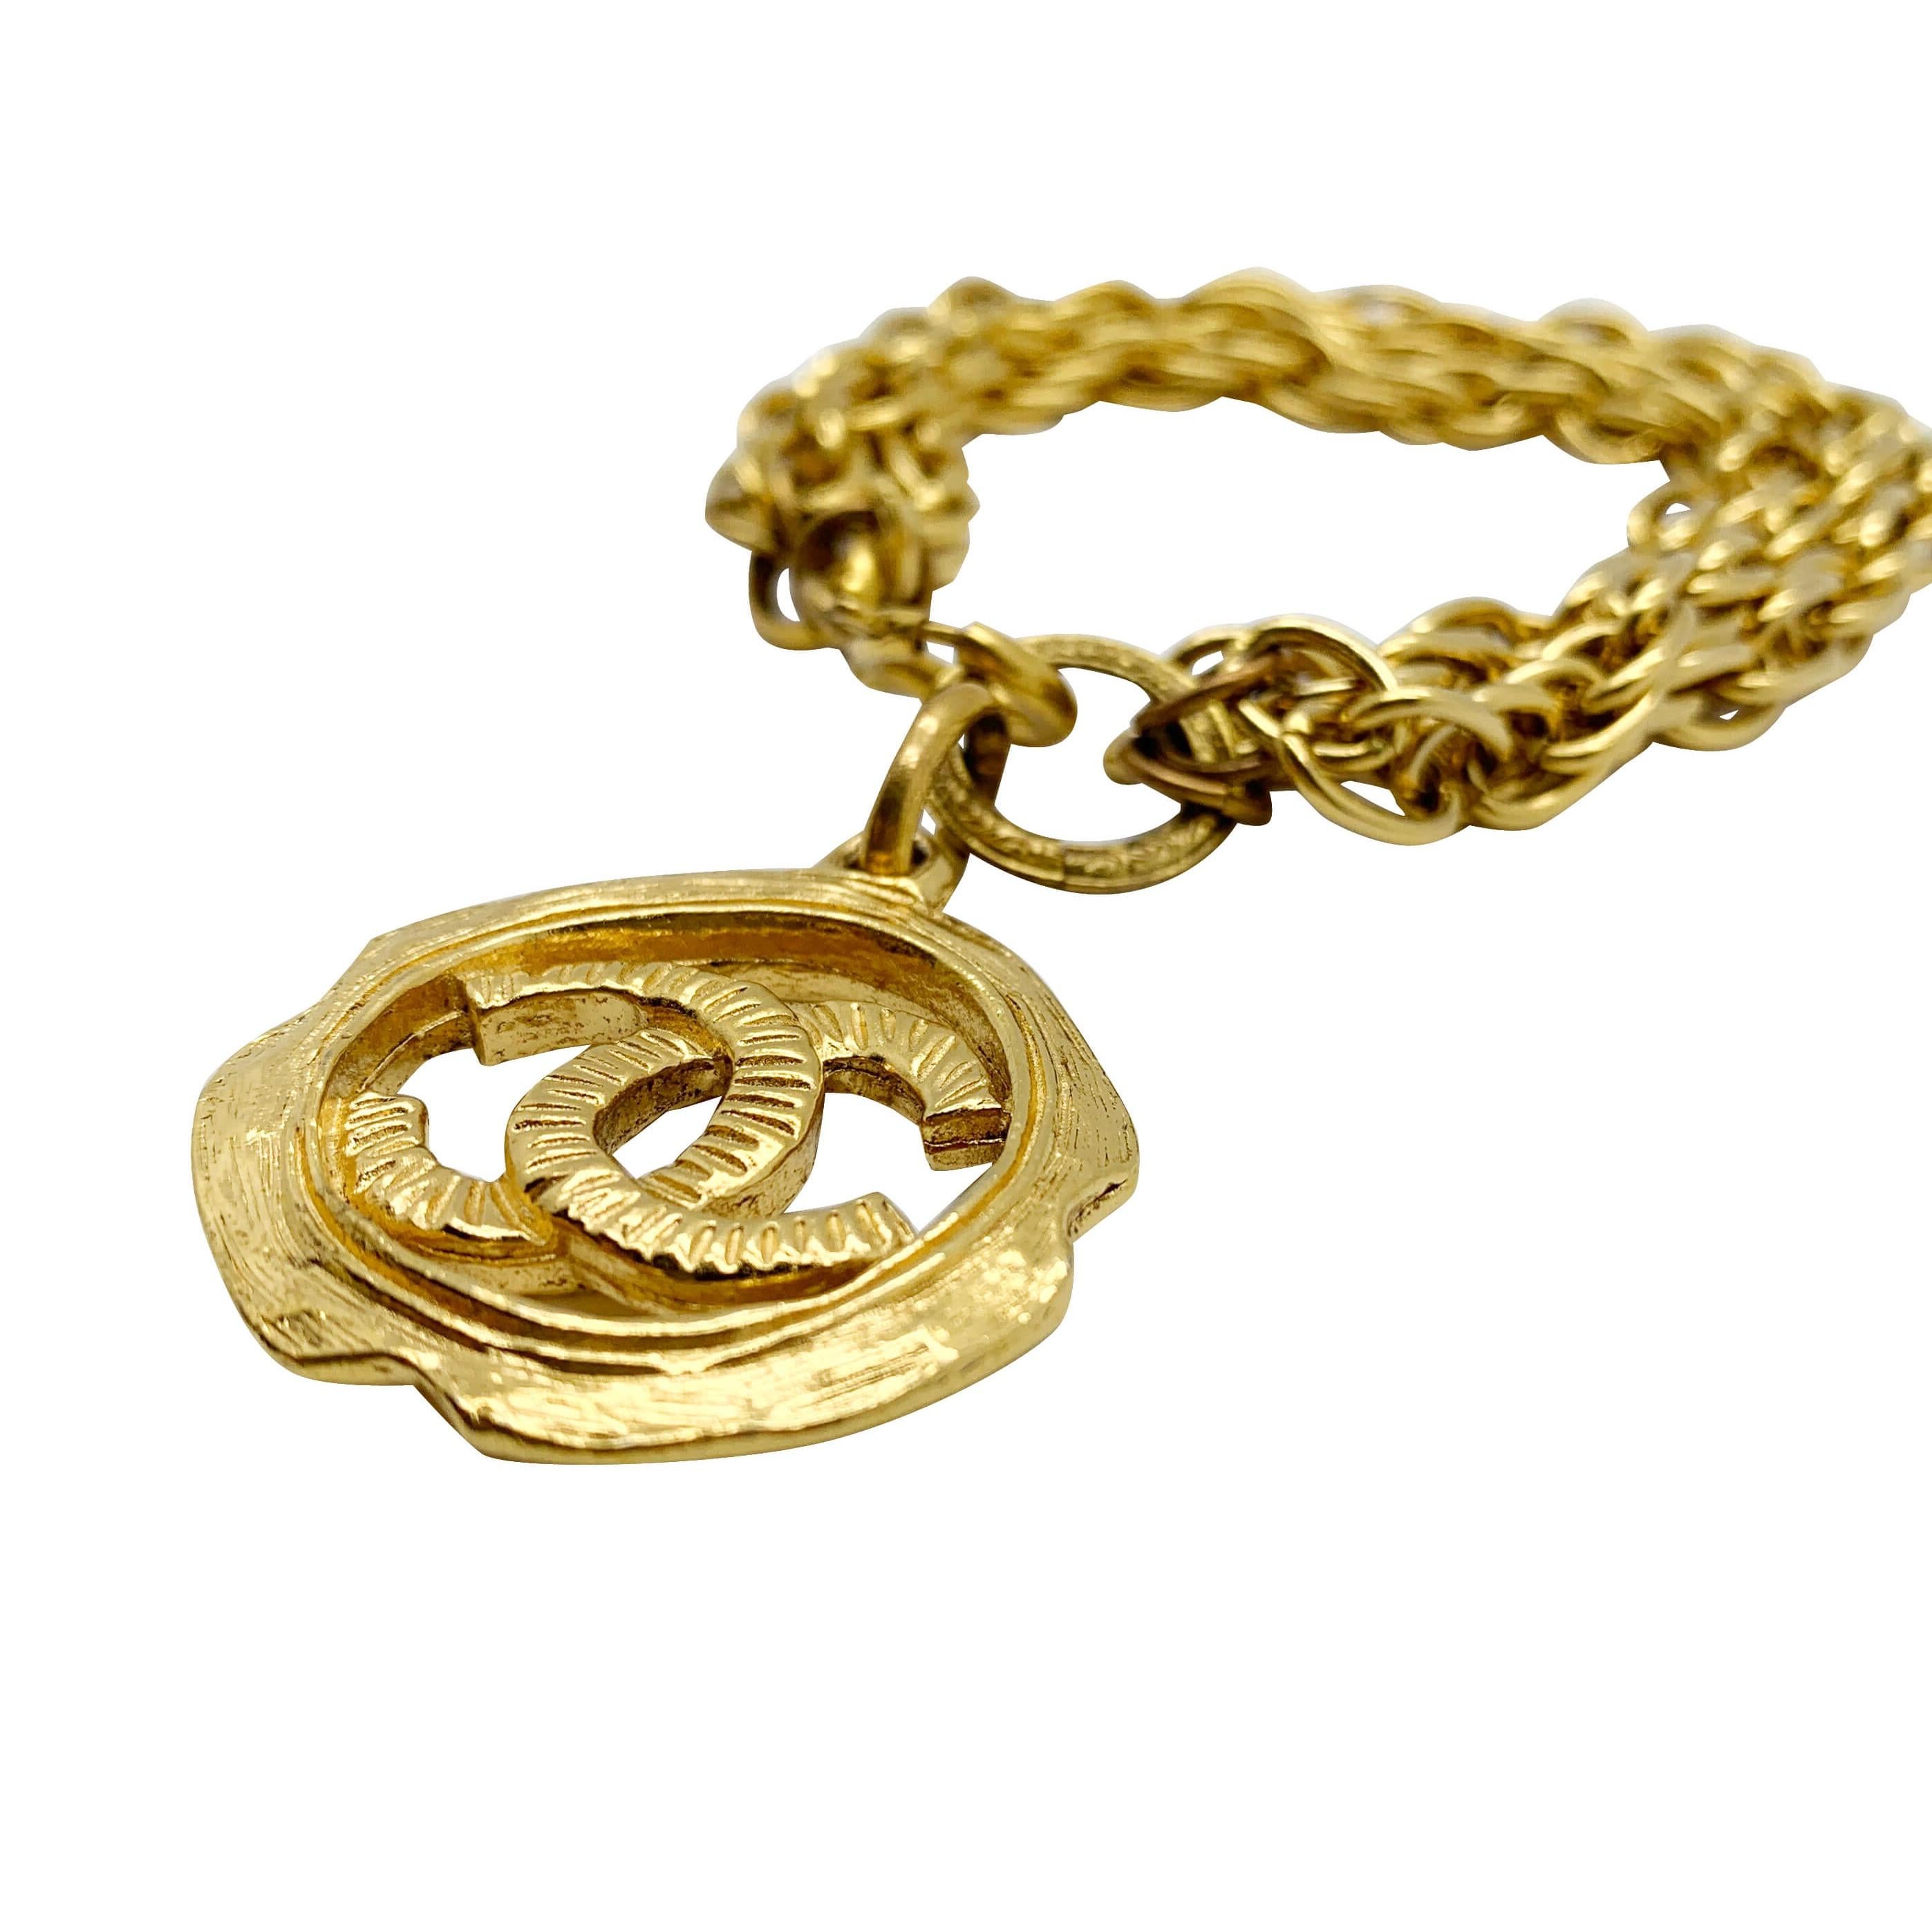 Our Vintage Chanel Logo Charm Bracelet. A stunning statement charm bracelet from the House of Chanel hailing from the uber glam 1980s. The large interlocking CC motif medallion dropping away from a torsade effect trio of fancy link chains. A very